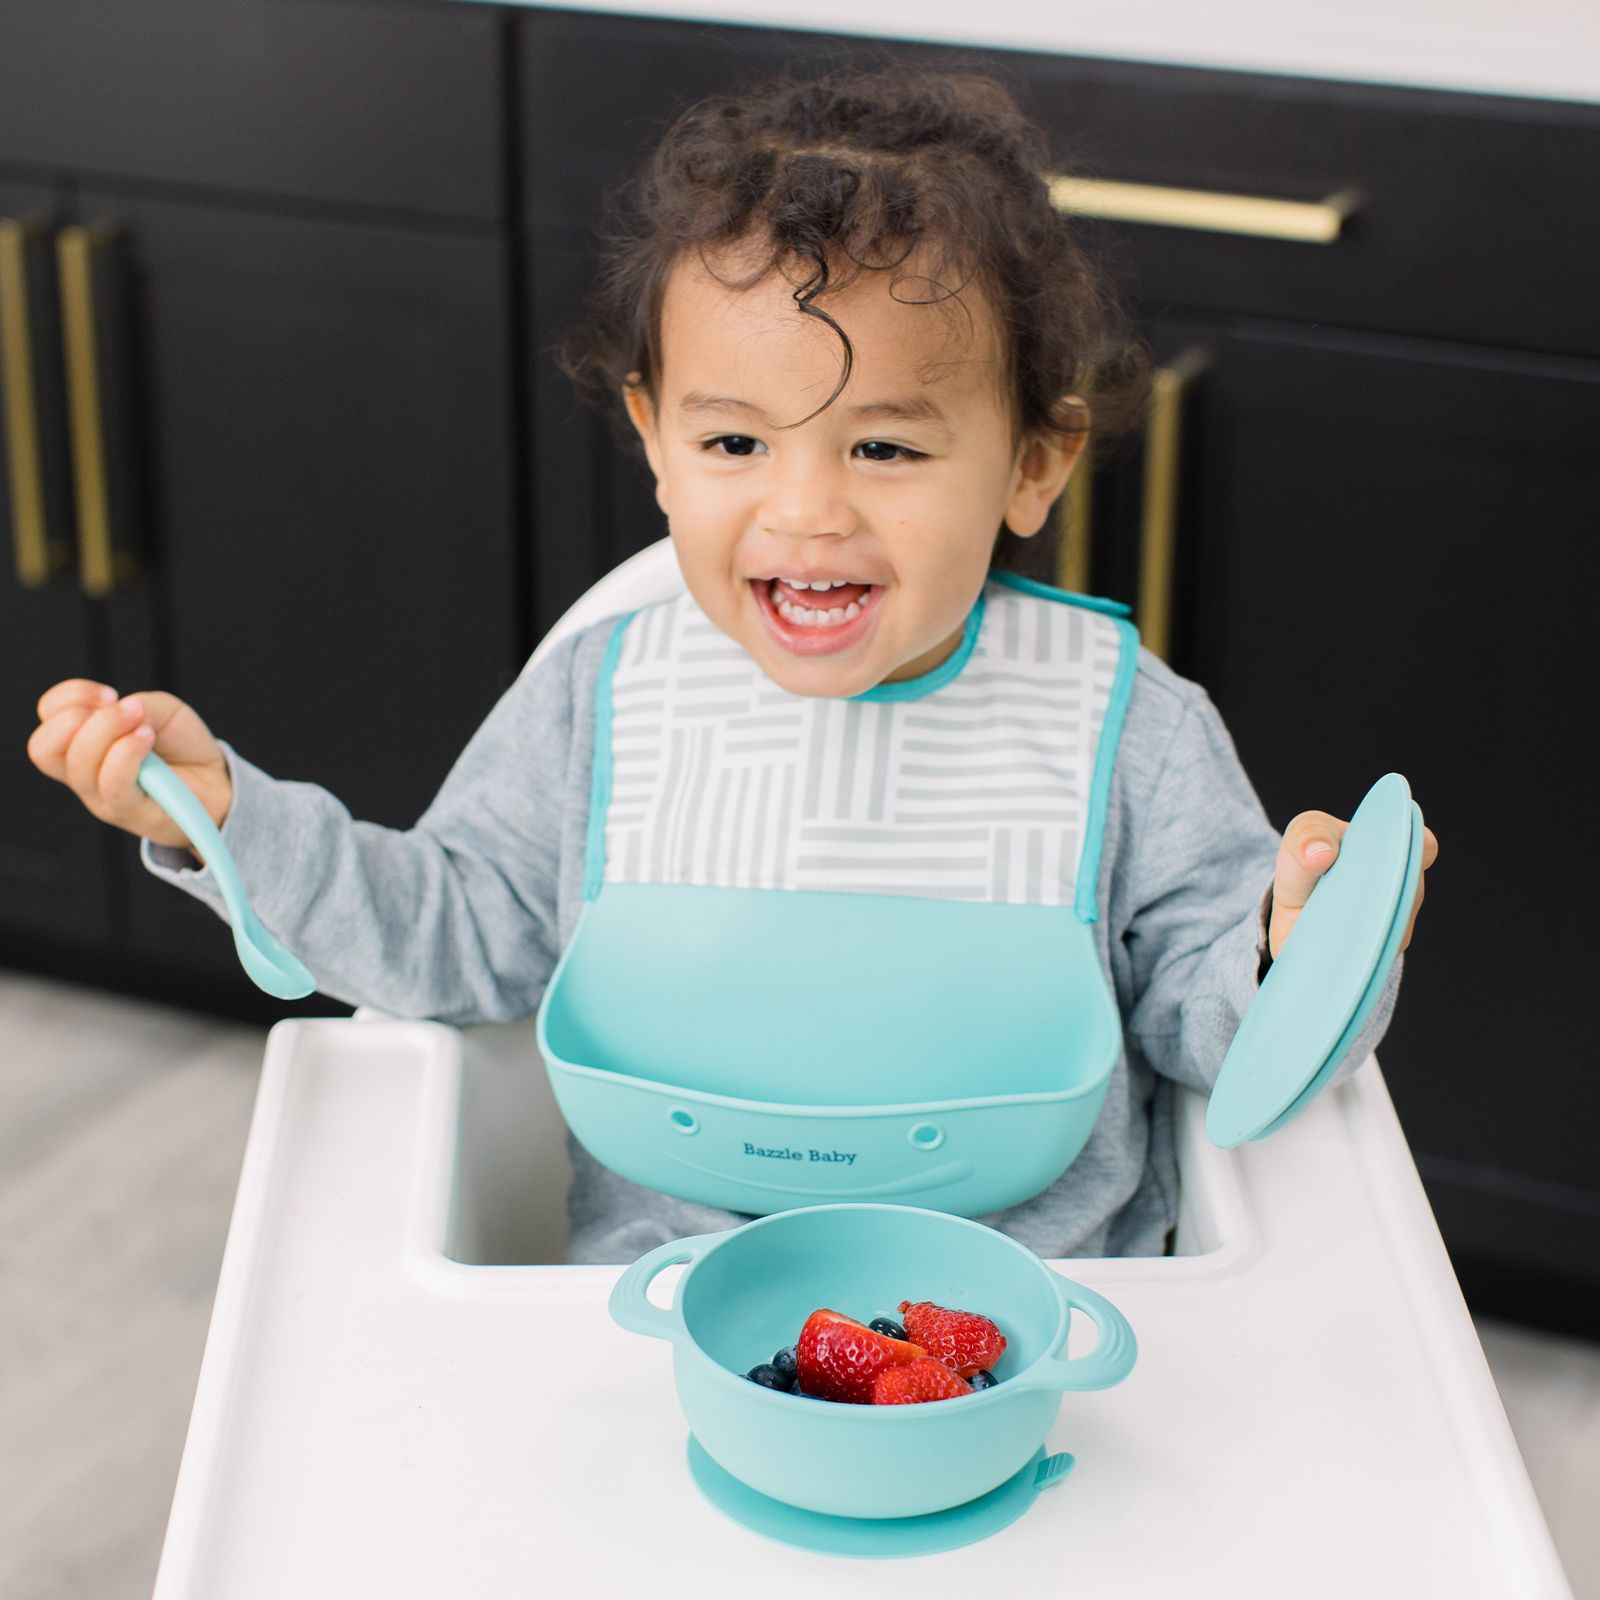 Baby Led Weaning Set With Bibs, Spoons, A Suction Bowl and Suction Pla